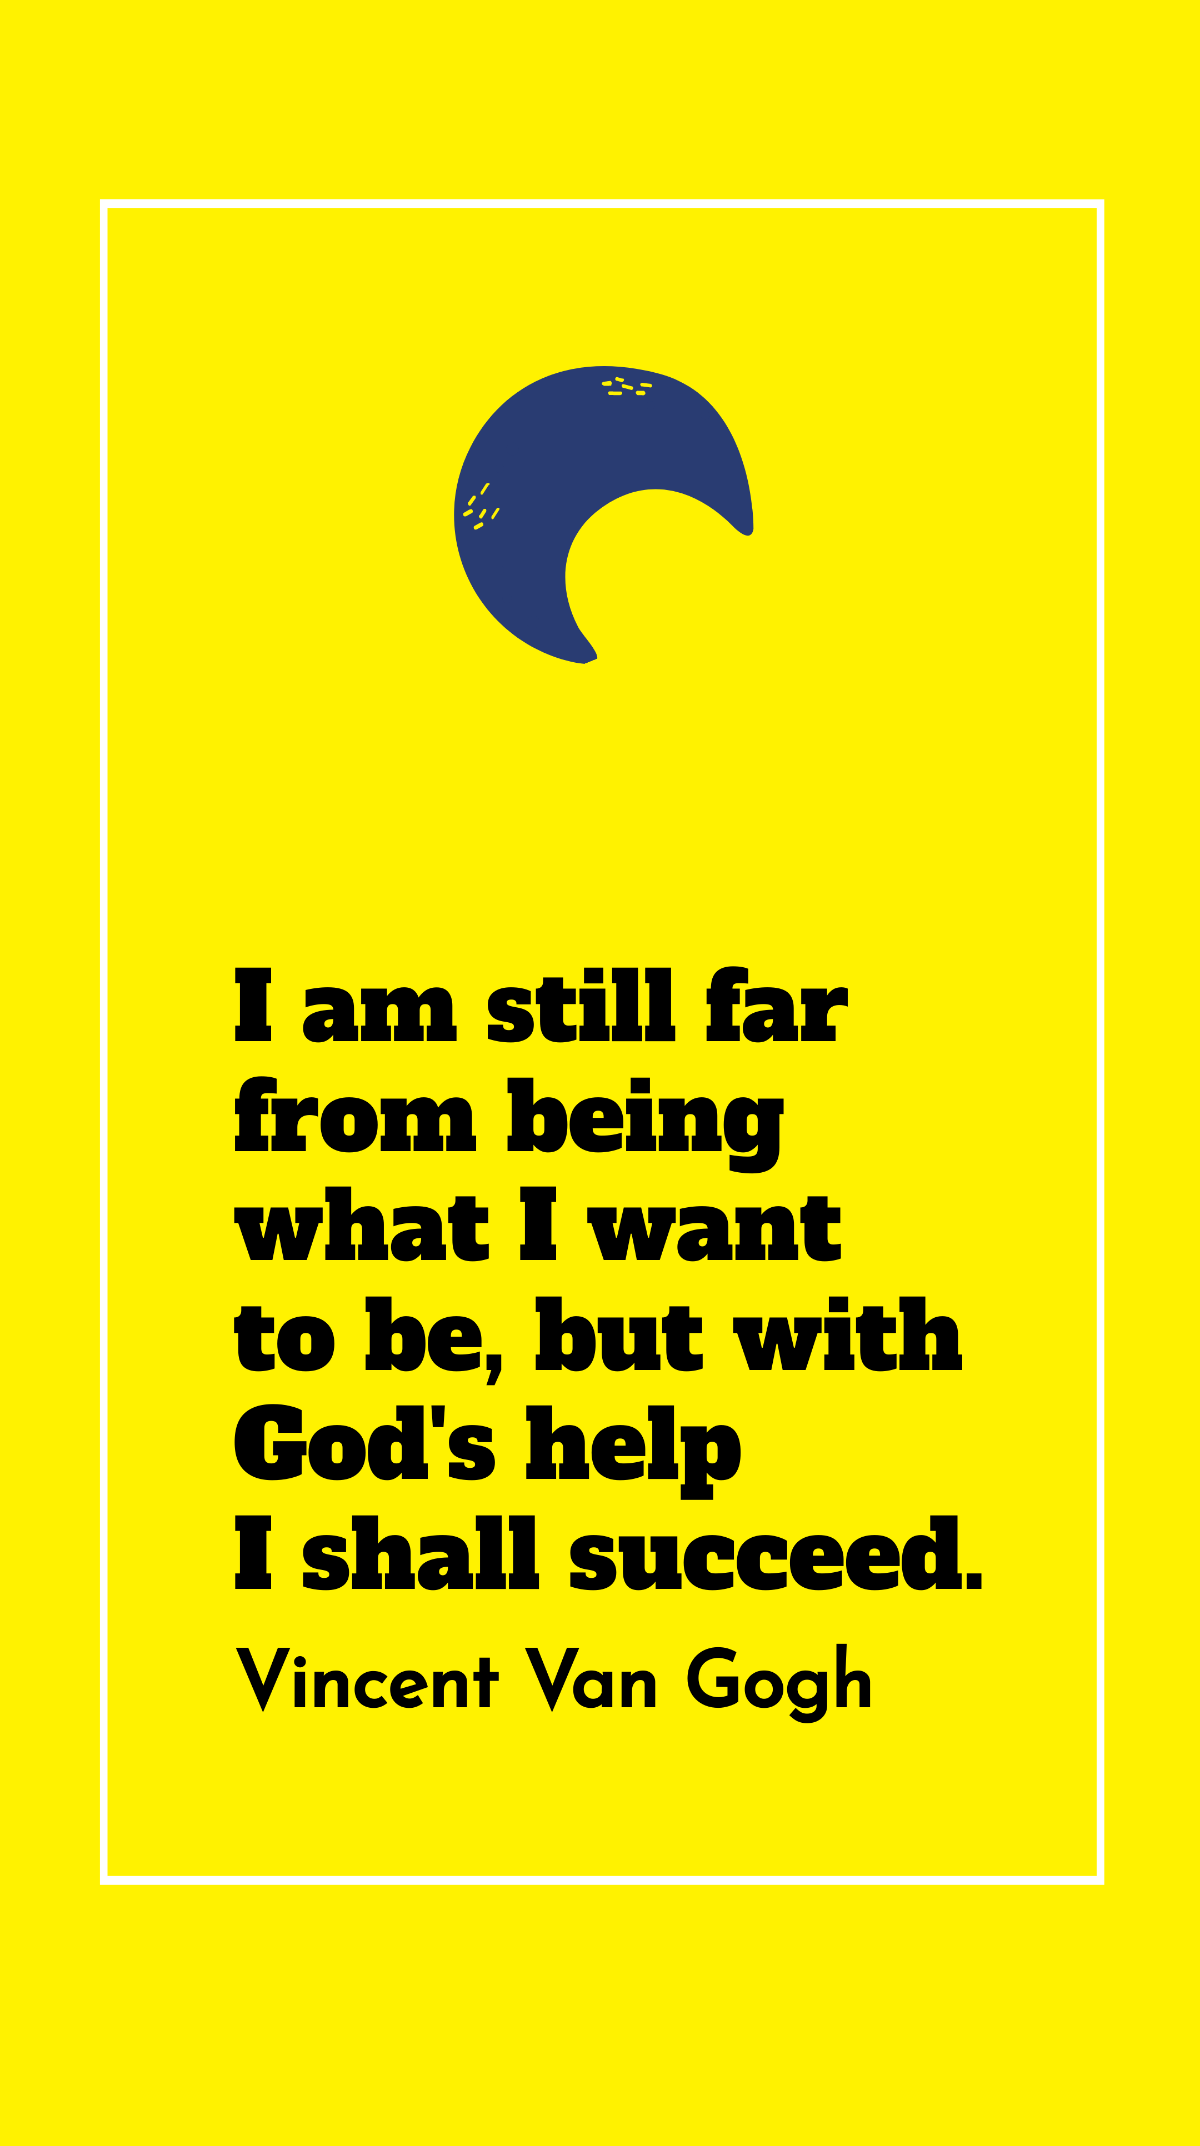 Free Vincent Van Gogh - I am still far from being what I want to be, but with God's help I shall succeed. Template